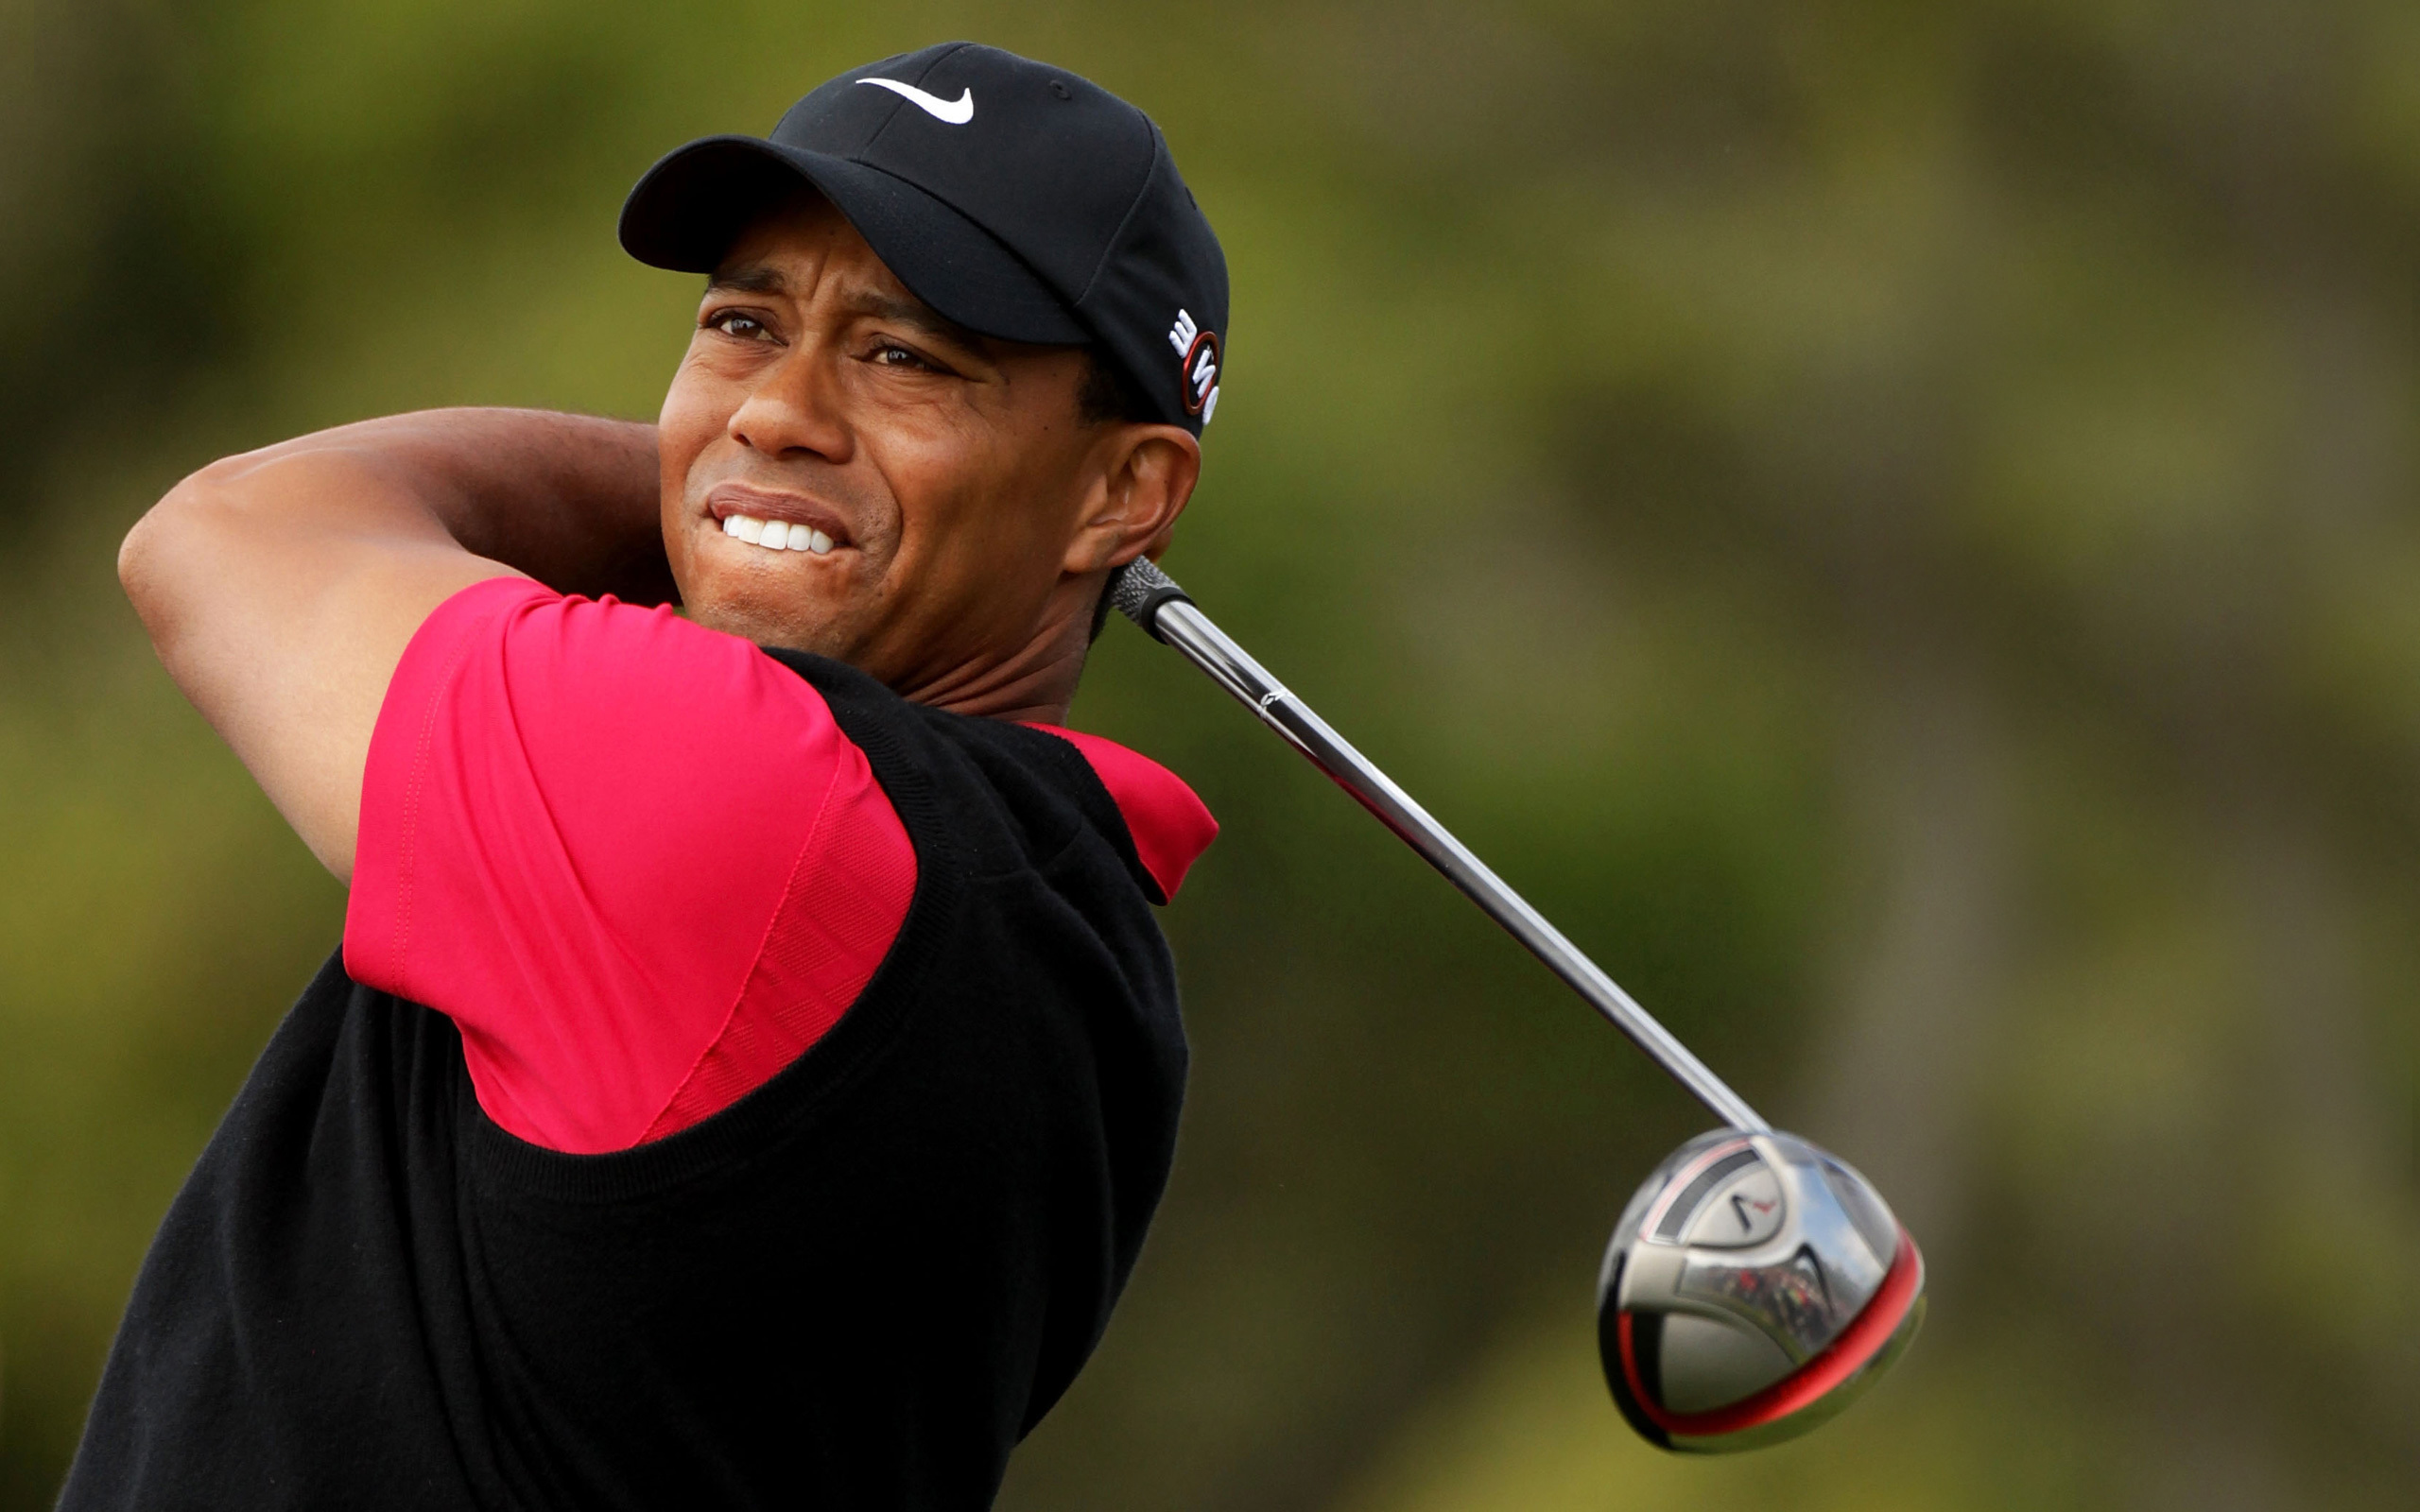 Tiger Woods Backgrounds, Compatible - PC, Mobile, Gadgets| 2560x1600 px